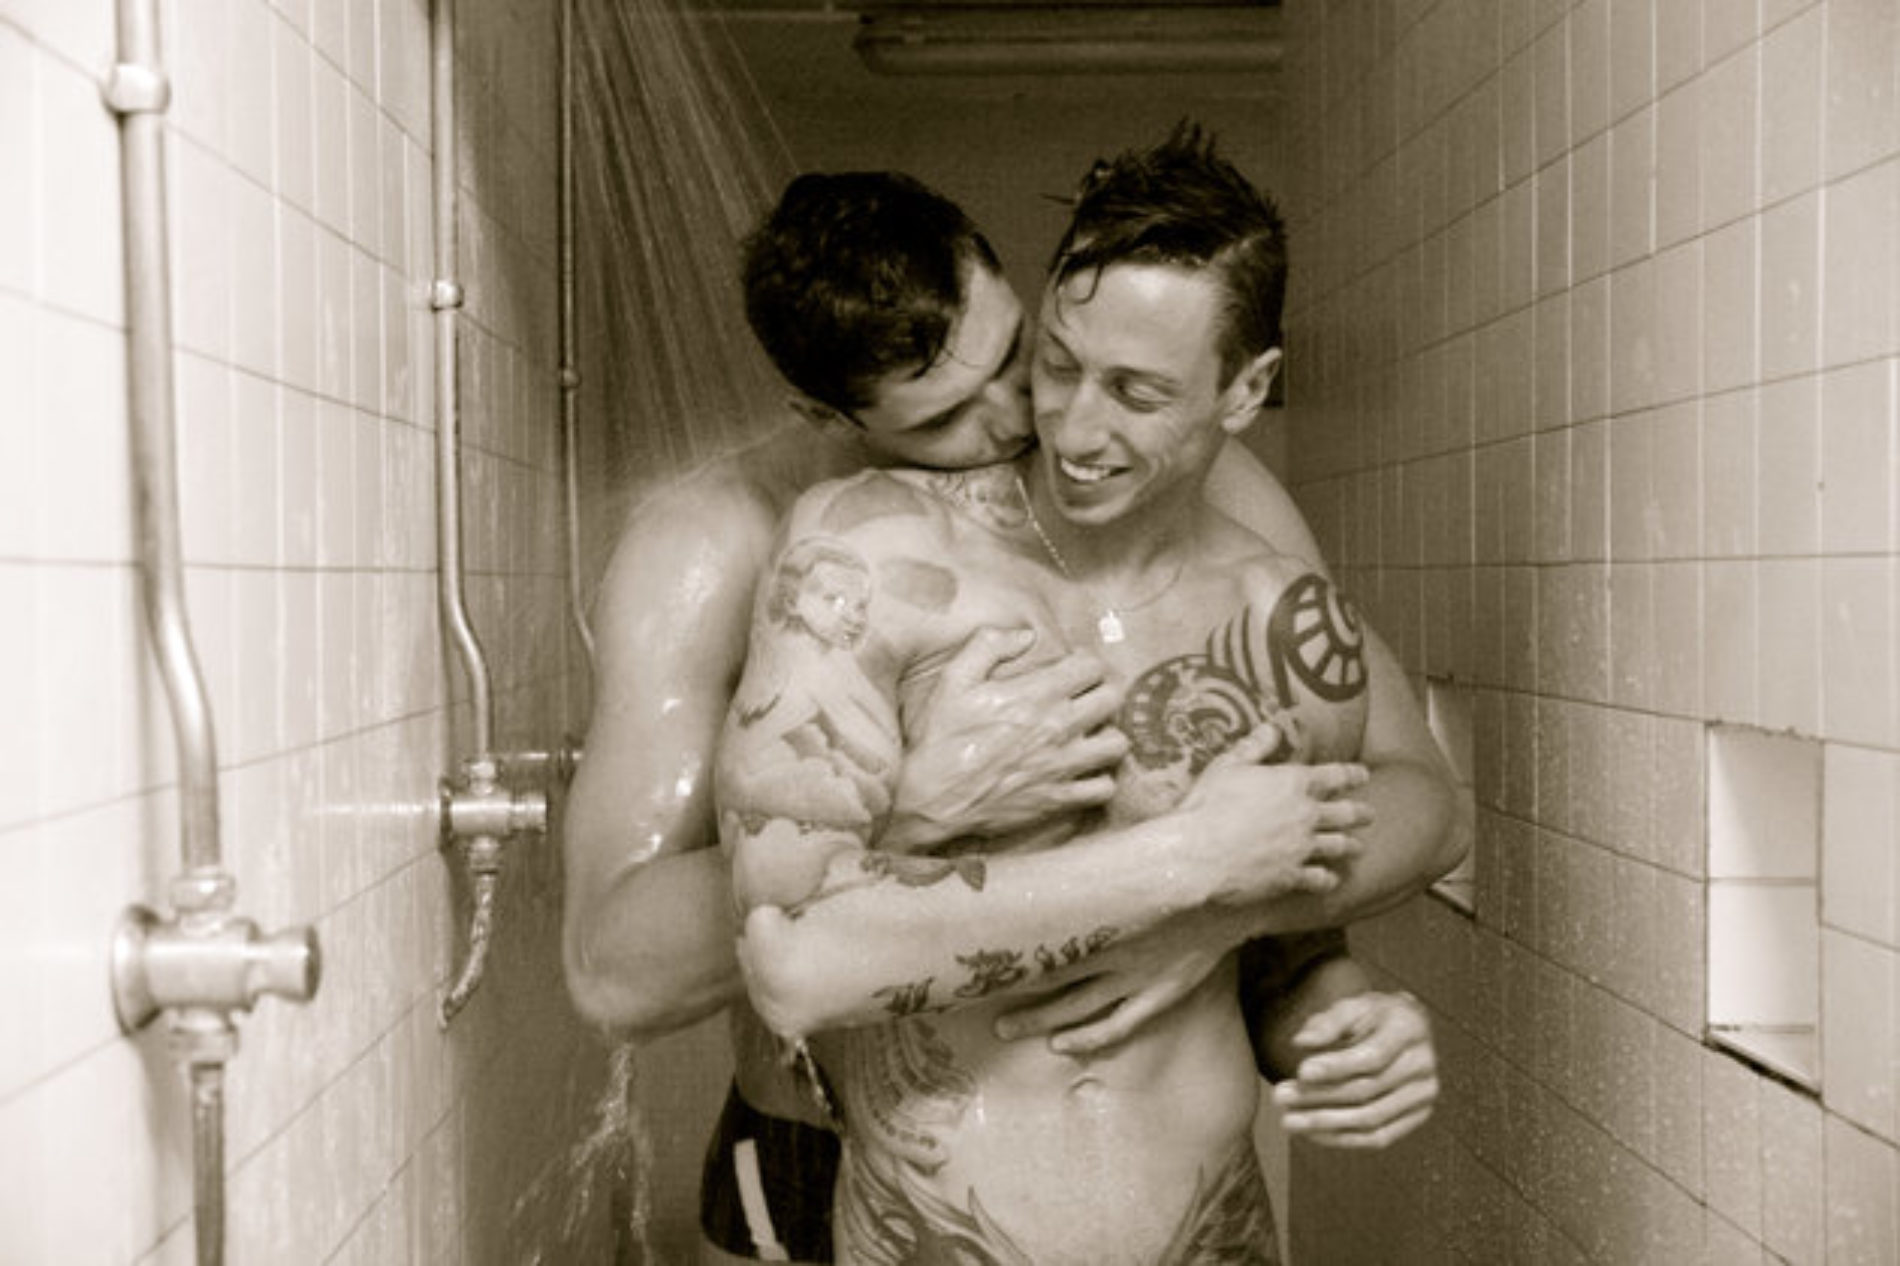 Straight Hollywood Stars Pose As Gay Couples To Show ‘Love Is Love’